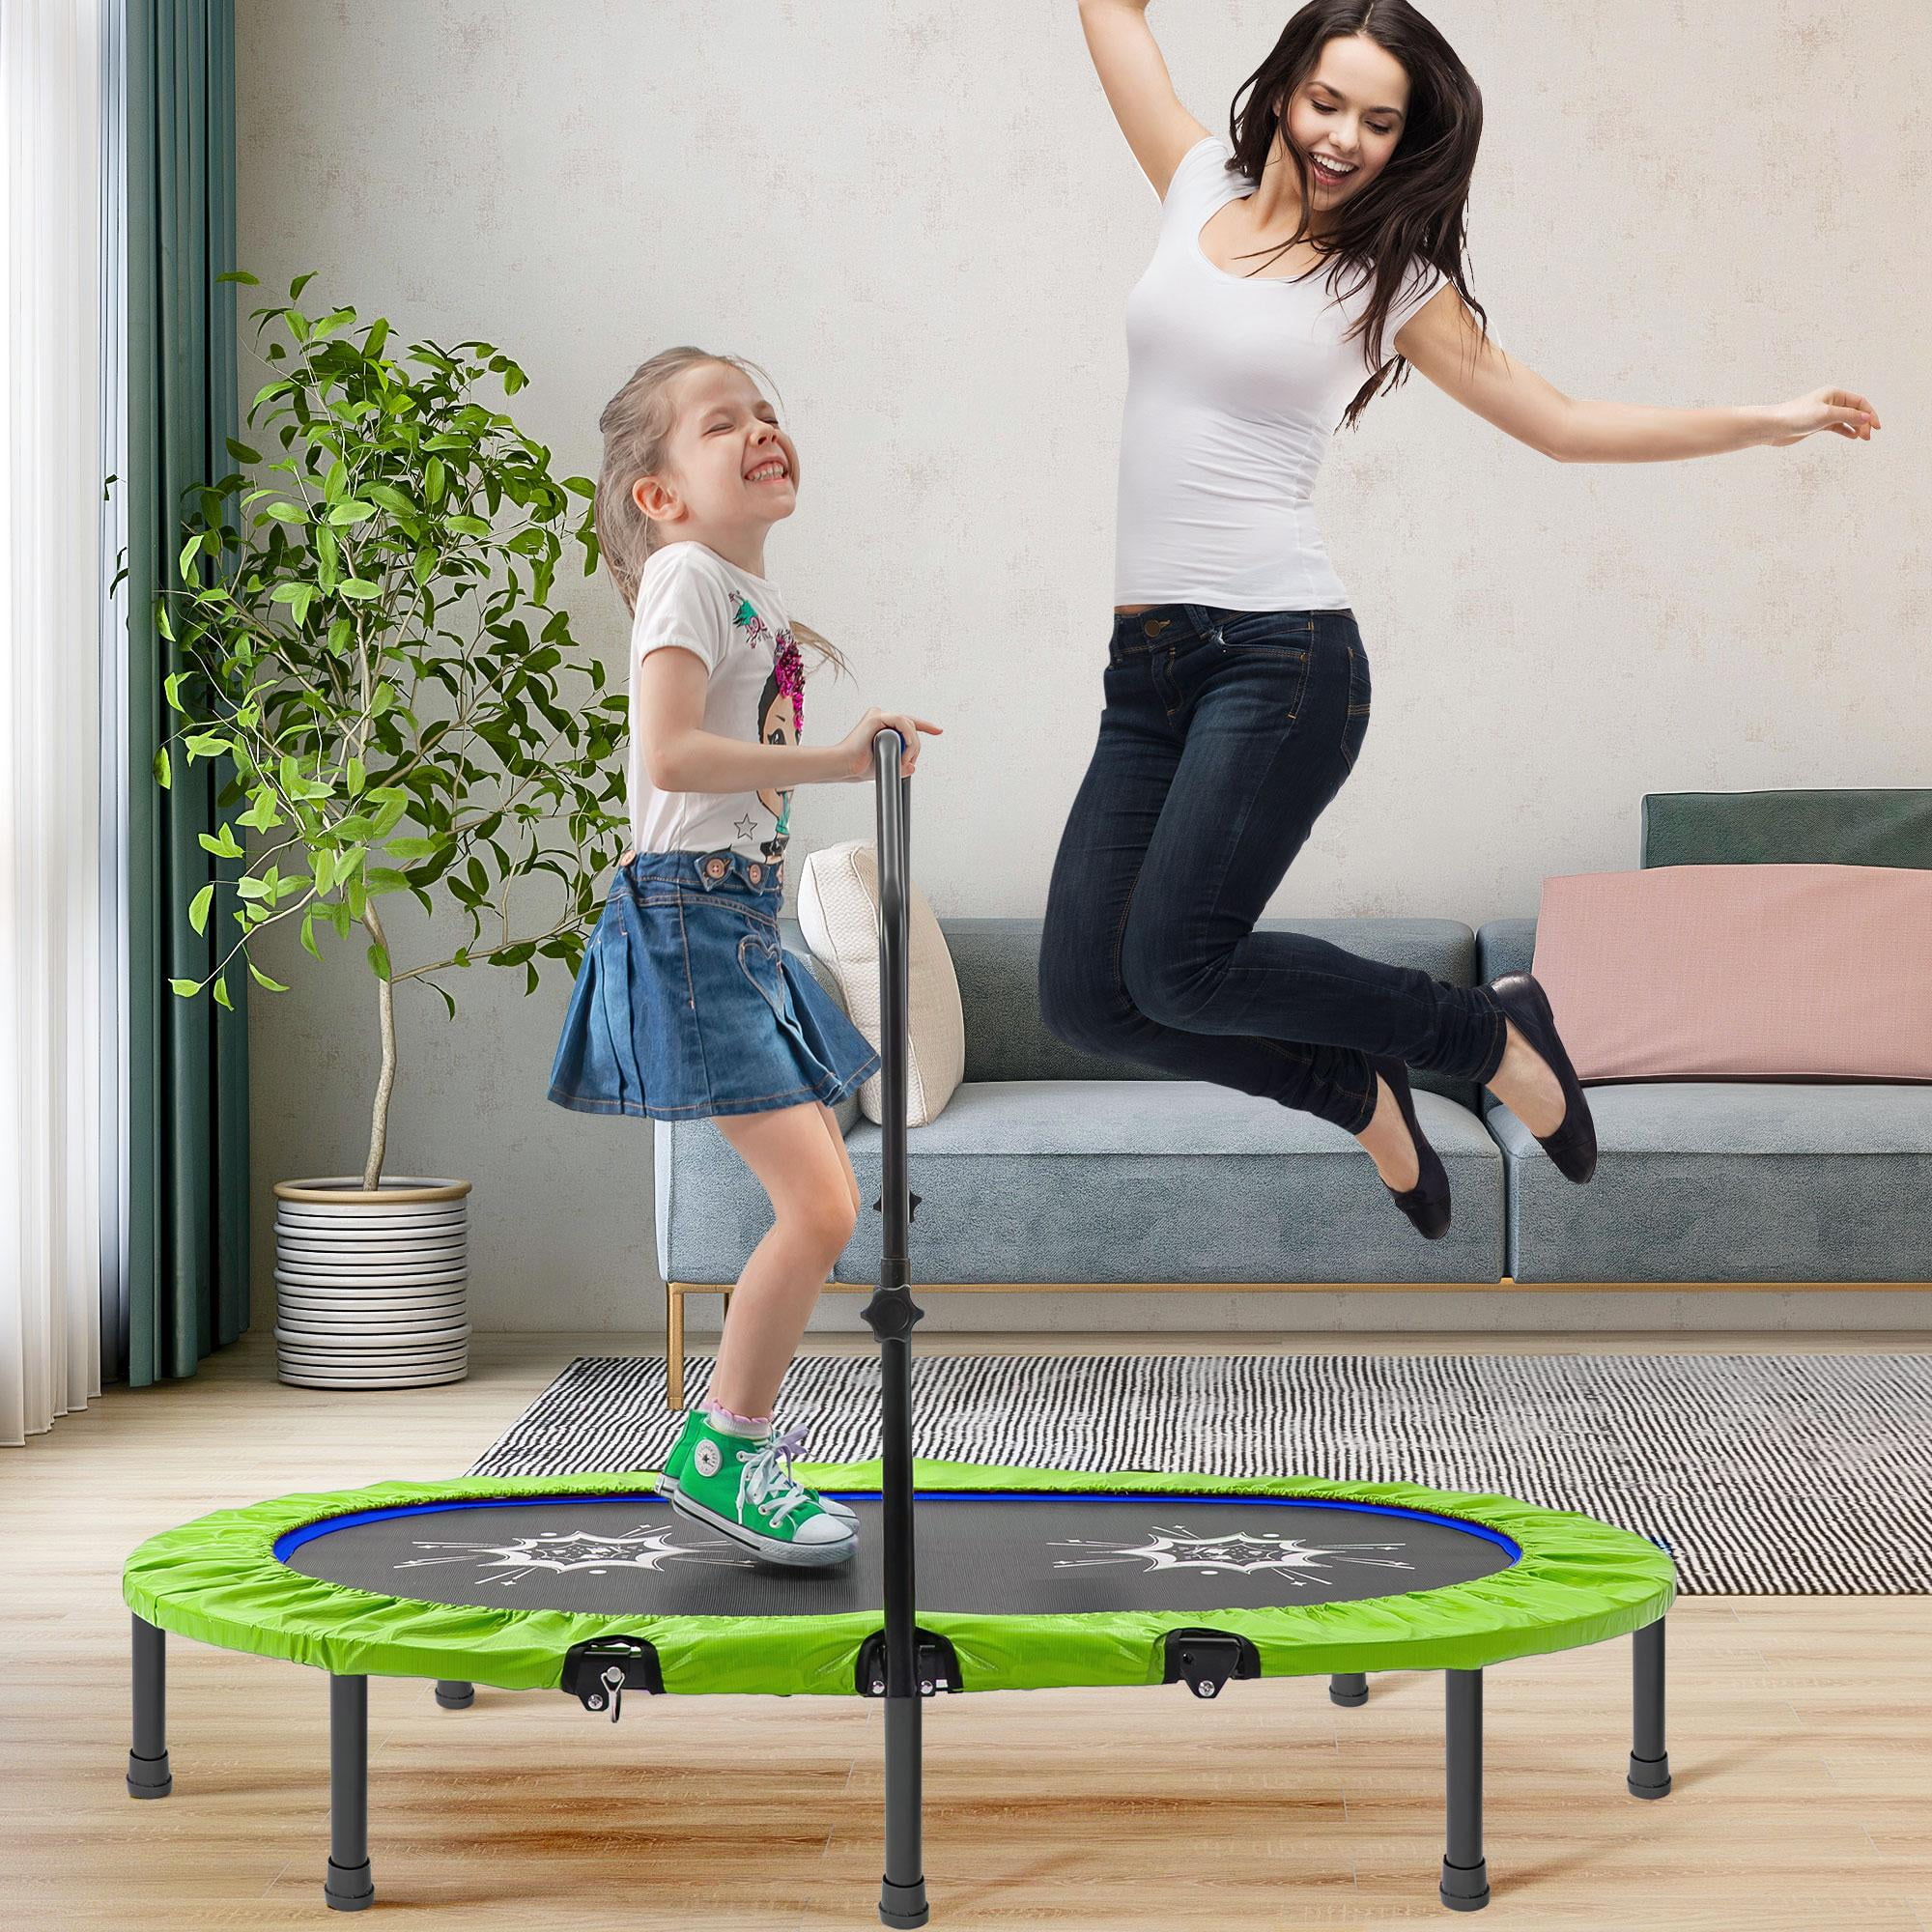 Indoor Trampoline for 2 Kids, Parent-Child Twins Trampoline for Toddlers with Adjustable Handle and Safety Pad,Home Gym Exercise Trampoline for Boys Girls, Cardio Trainer, Green